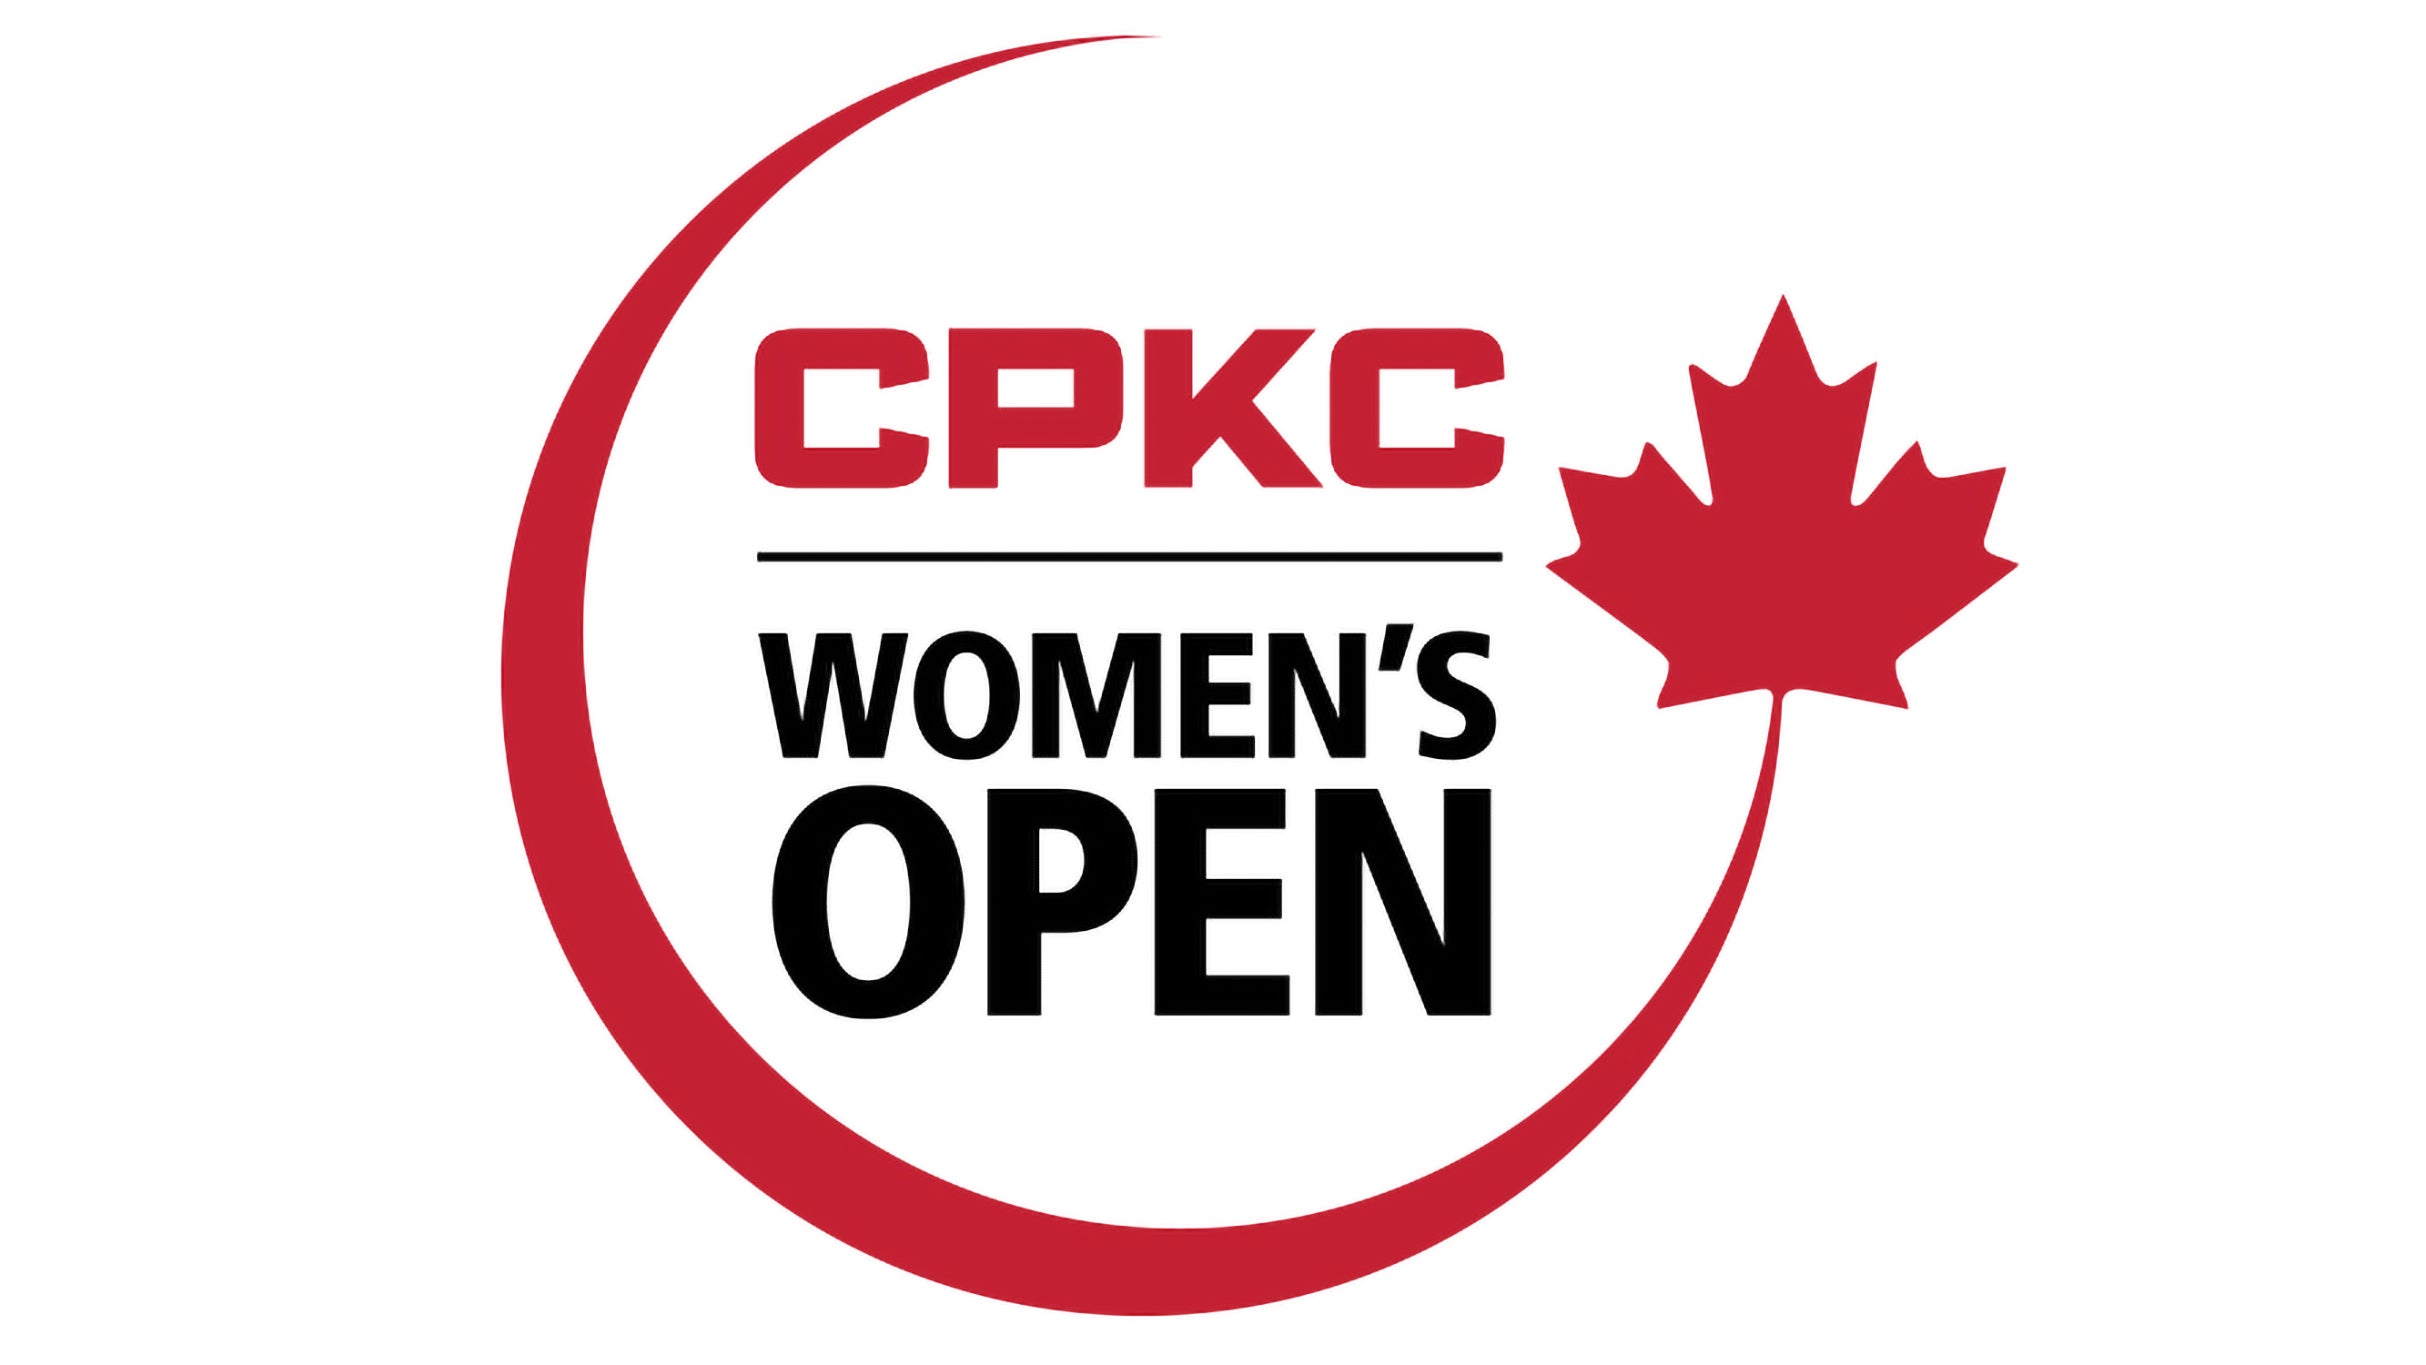 CPKC Women's Open - Thursday Tickets in Vancouver promo photo for Golf Canada Partner presale offer code